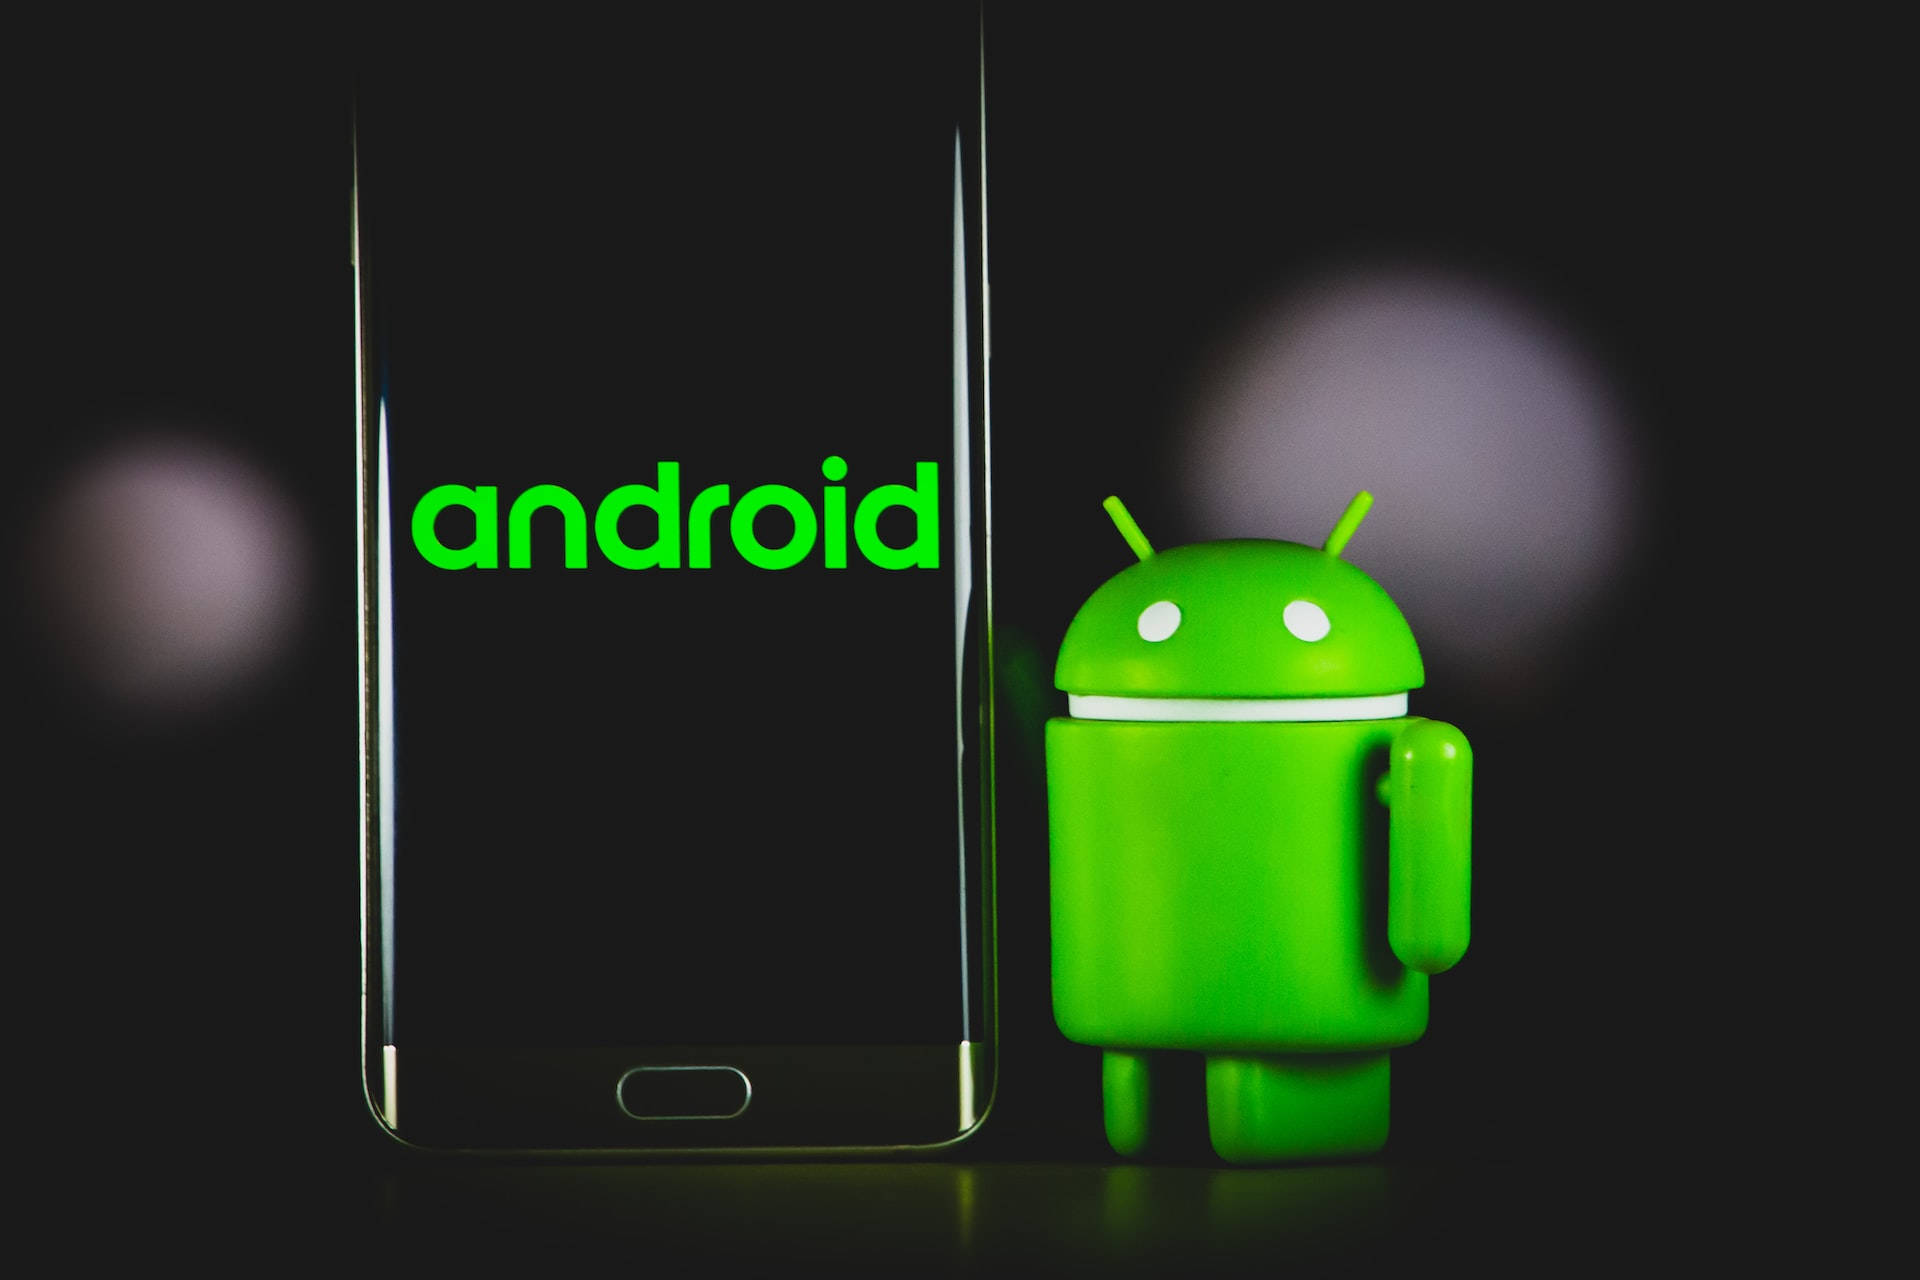 Android Os - The Best Android Phone Wallpaper